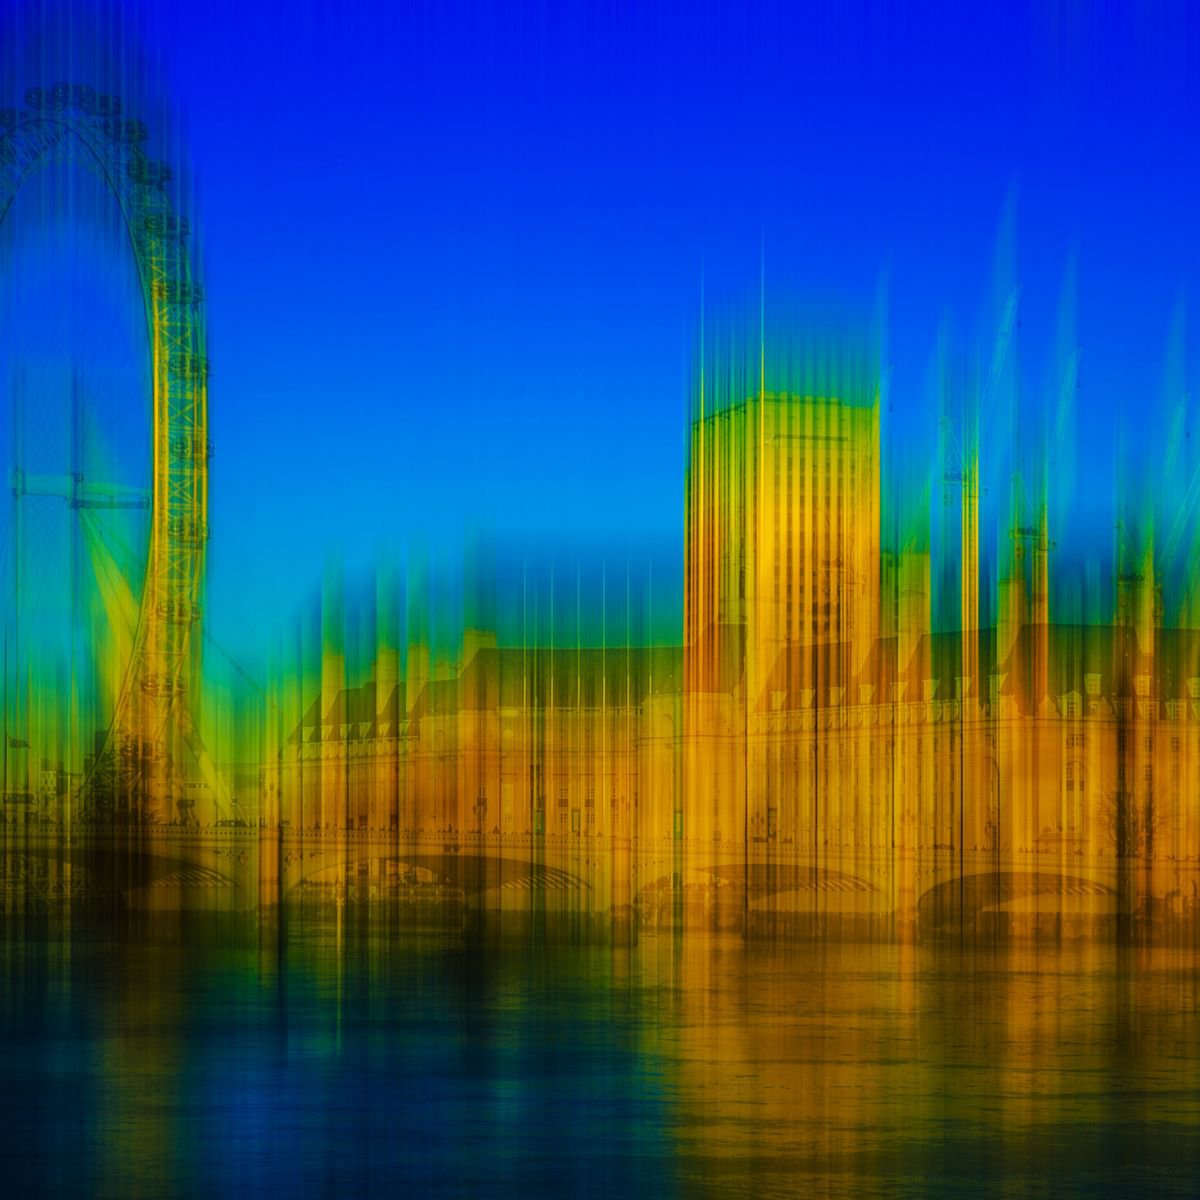 Abstract London: County Hall and London Eye by Graham Briggs